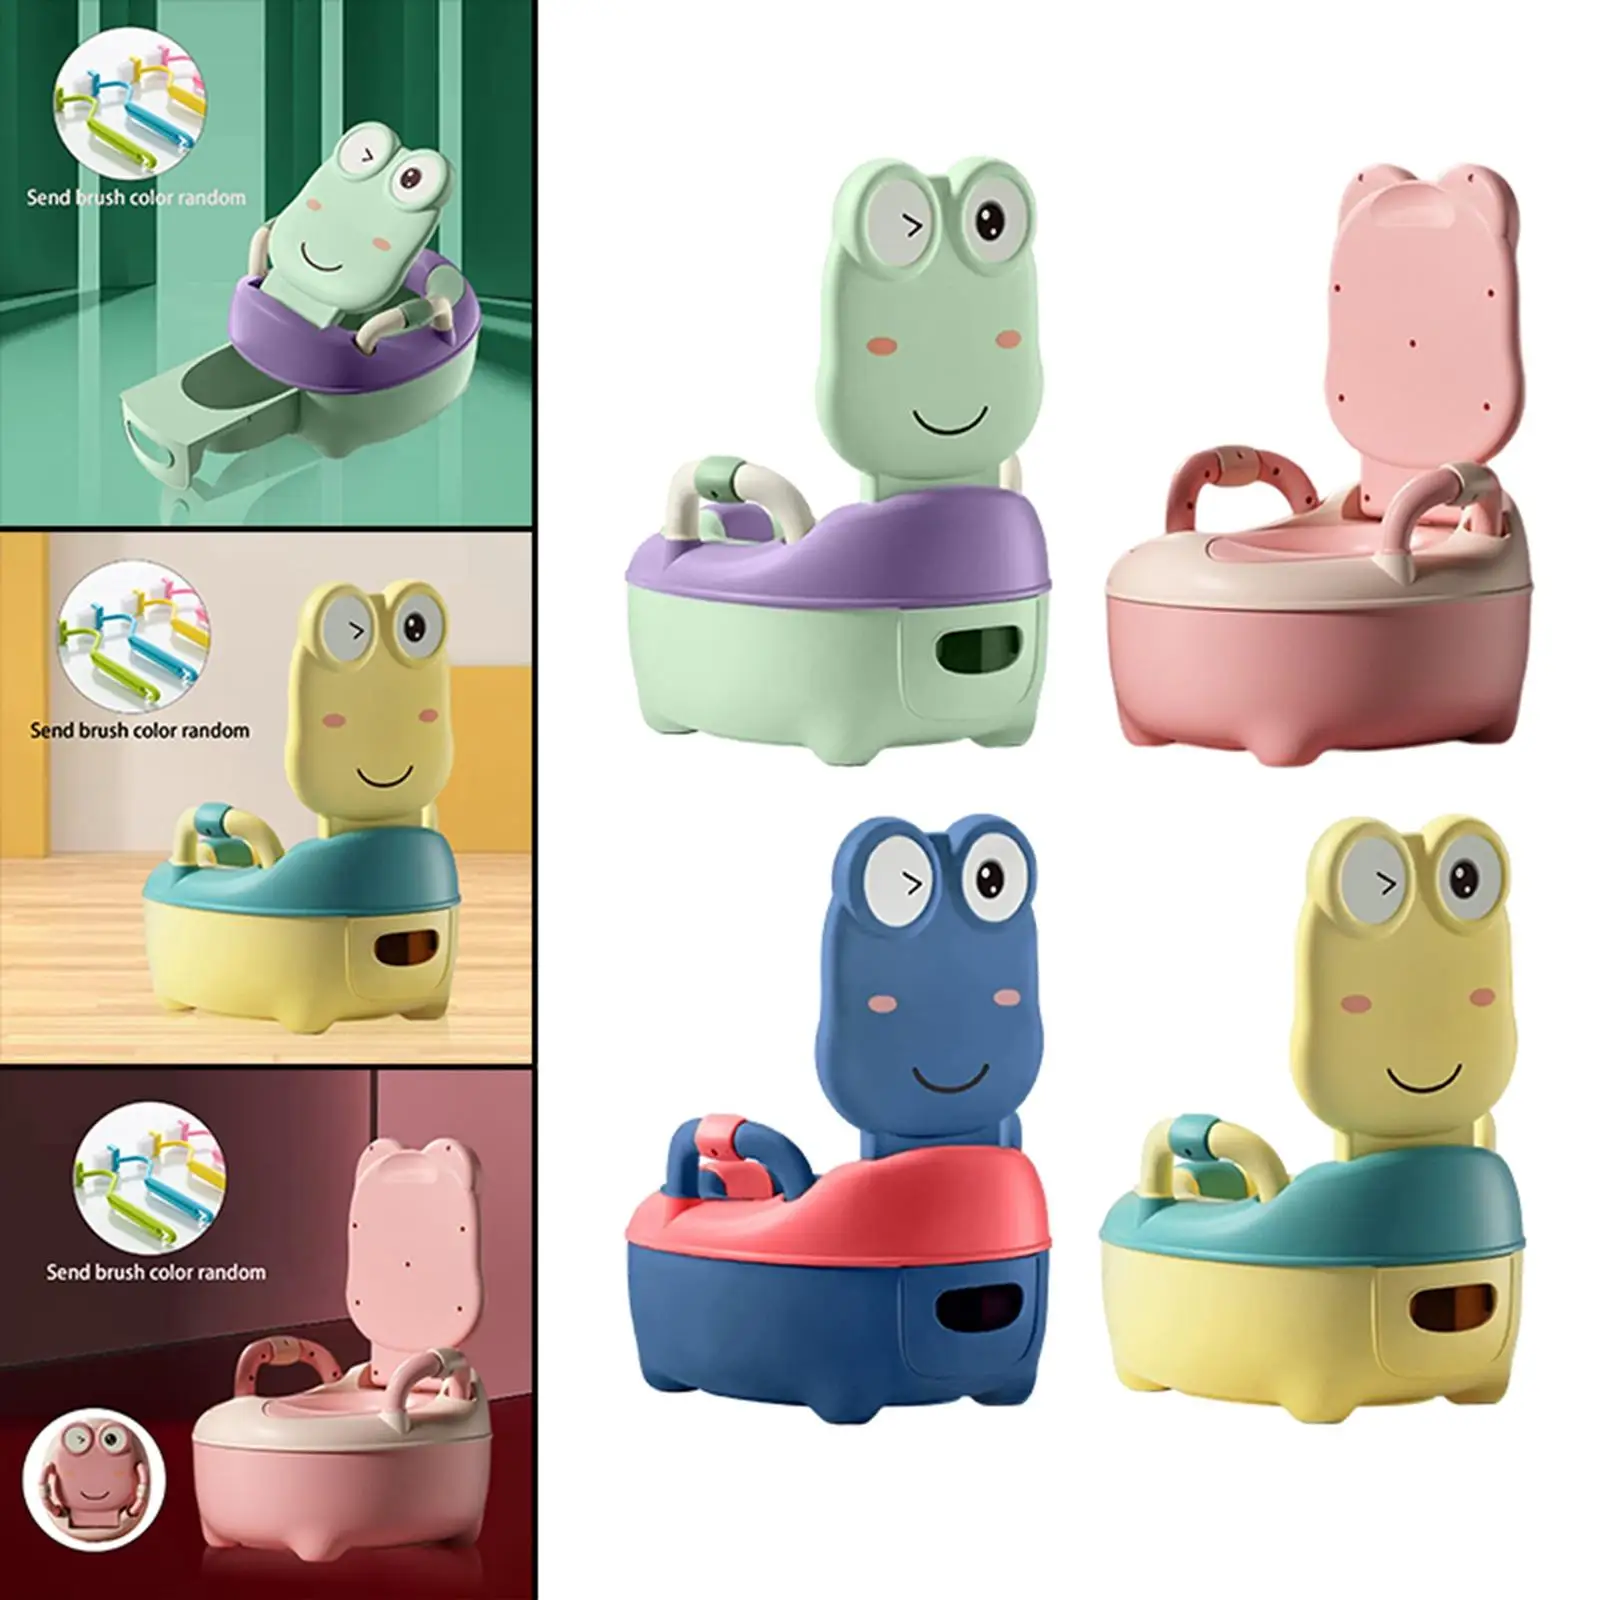 Cartoon baby Toilet Seat potty Chair Trainer Seat Pot with Handles for Kids Toddler Unisex Child